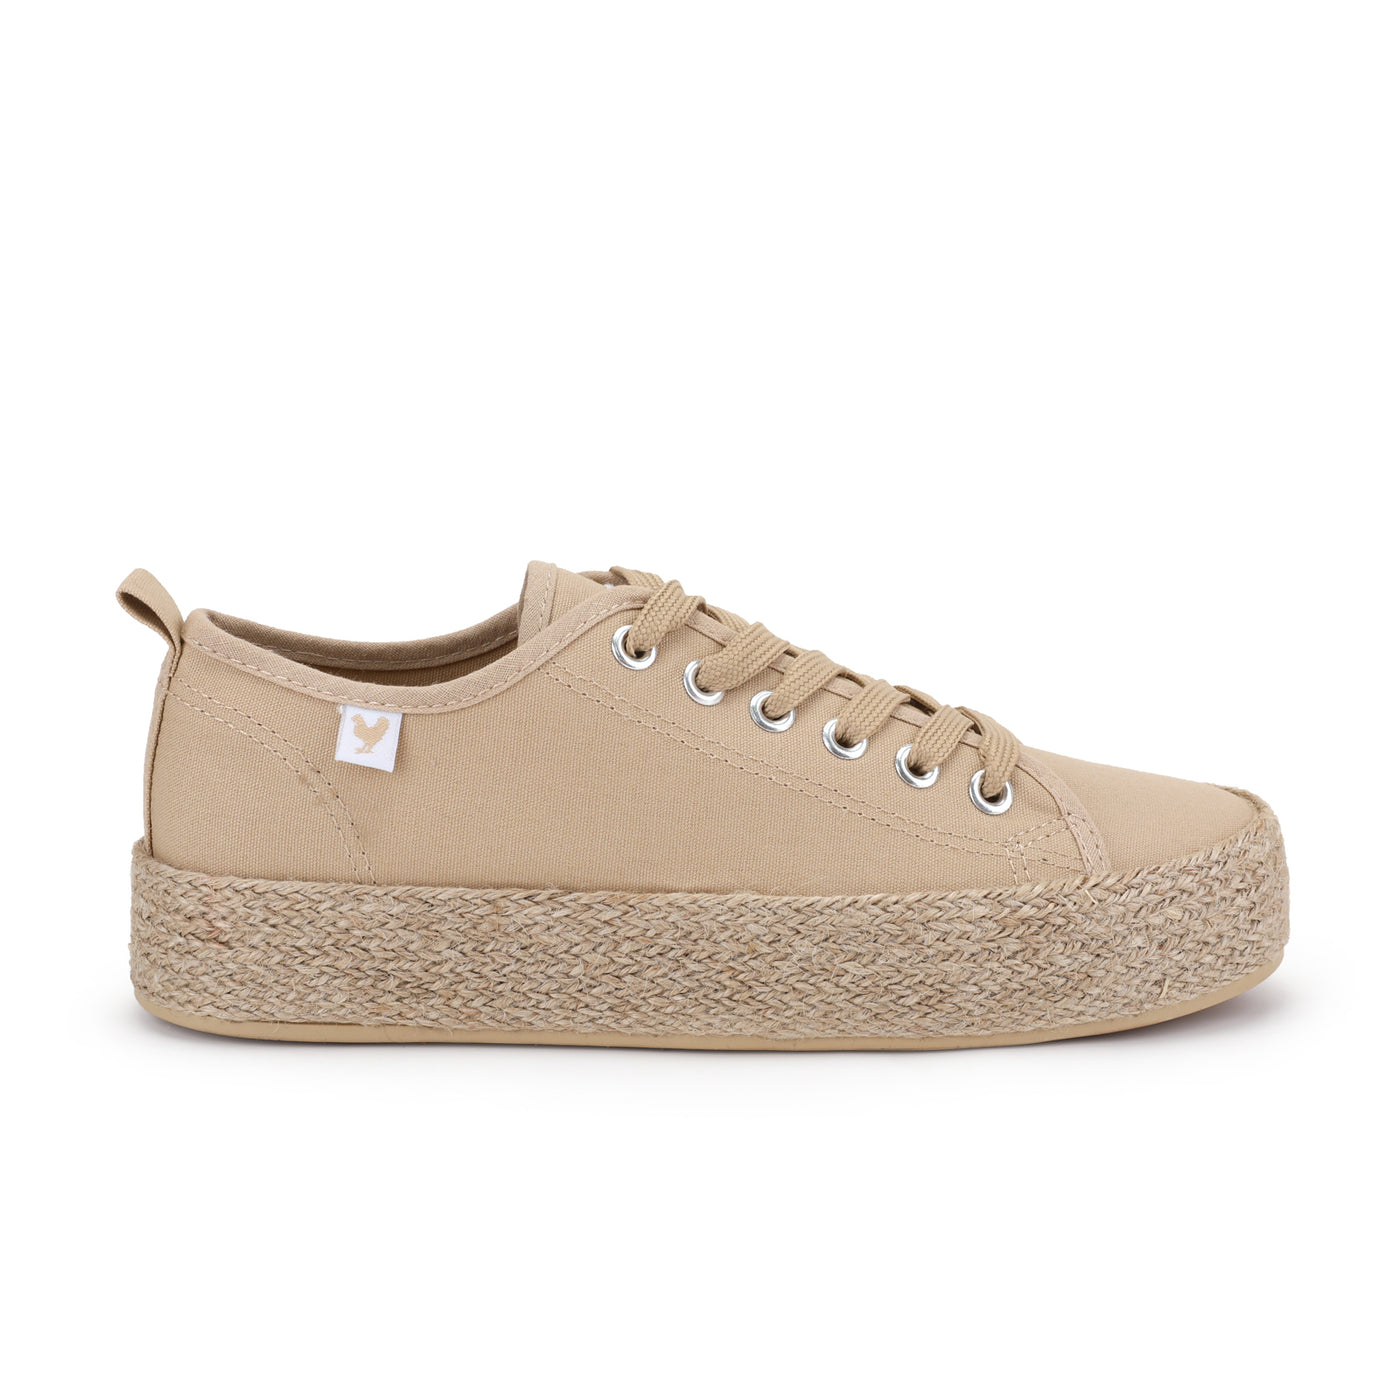 Caramel canvas lace-up espadrille sneakers